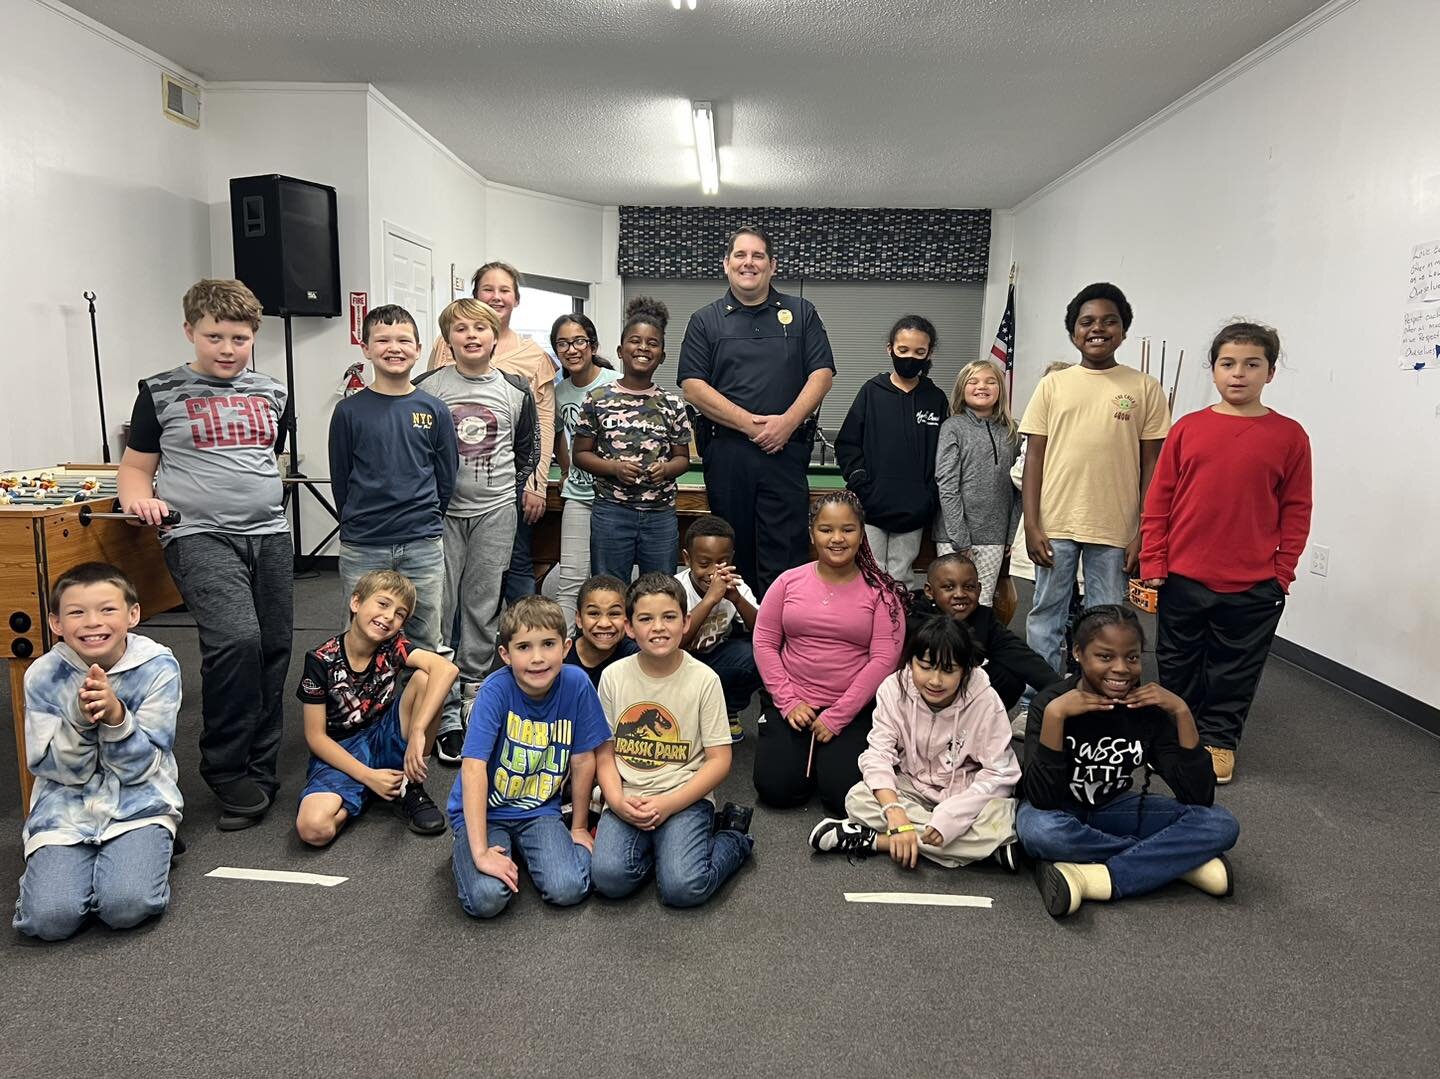 Thank you to Chief Rummage for visiting Kidz Dreamz Klub. We appreciate what you do to keep Lexington safe. Lexington Police Department